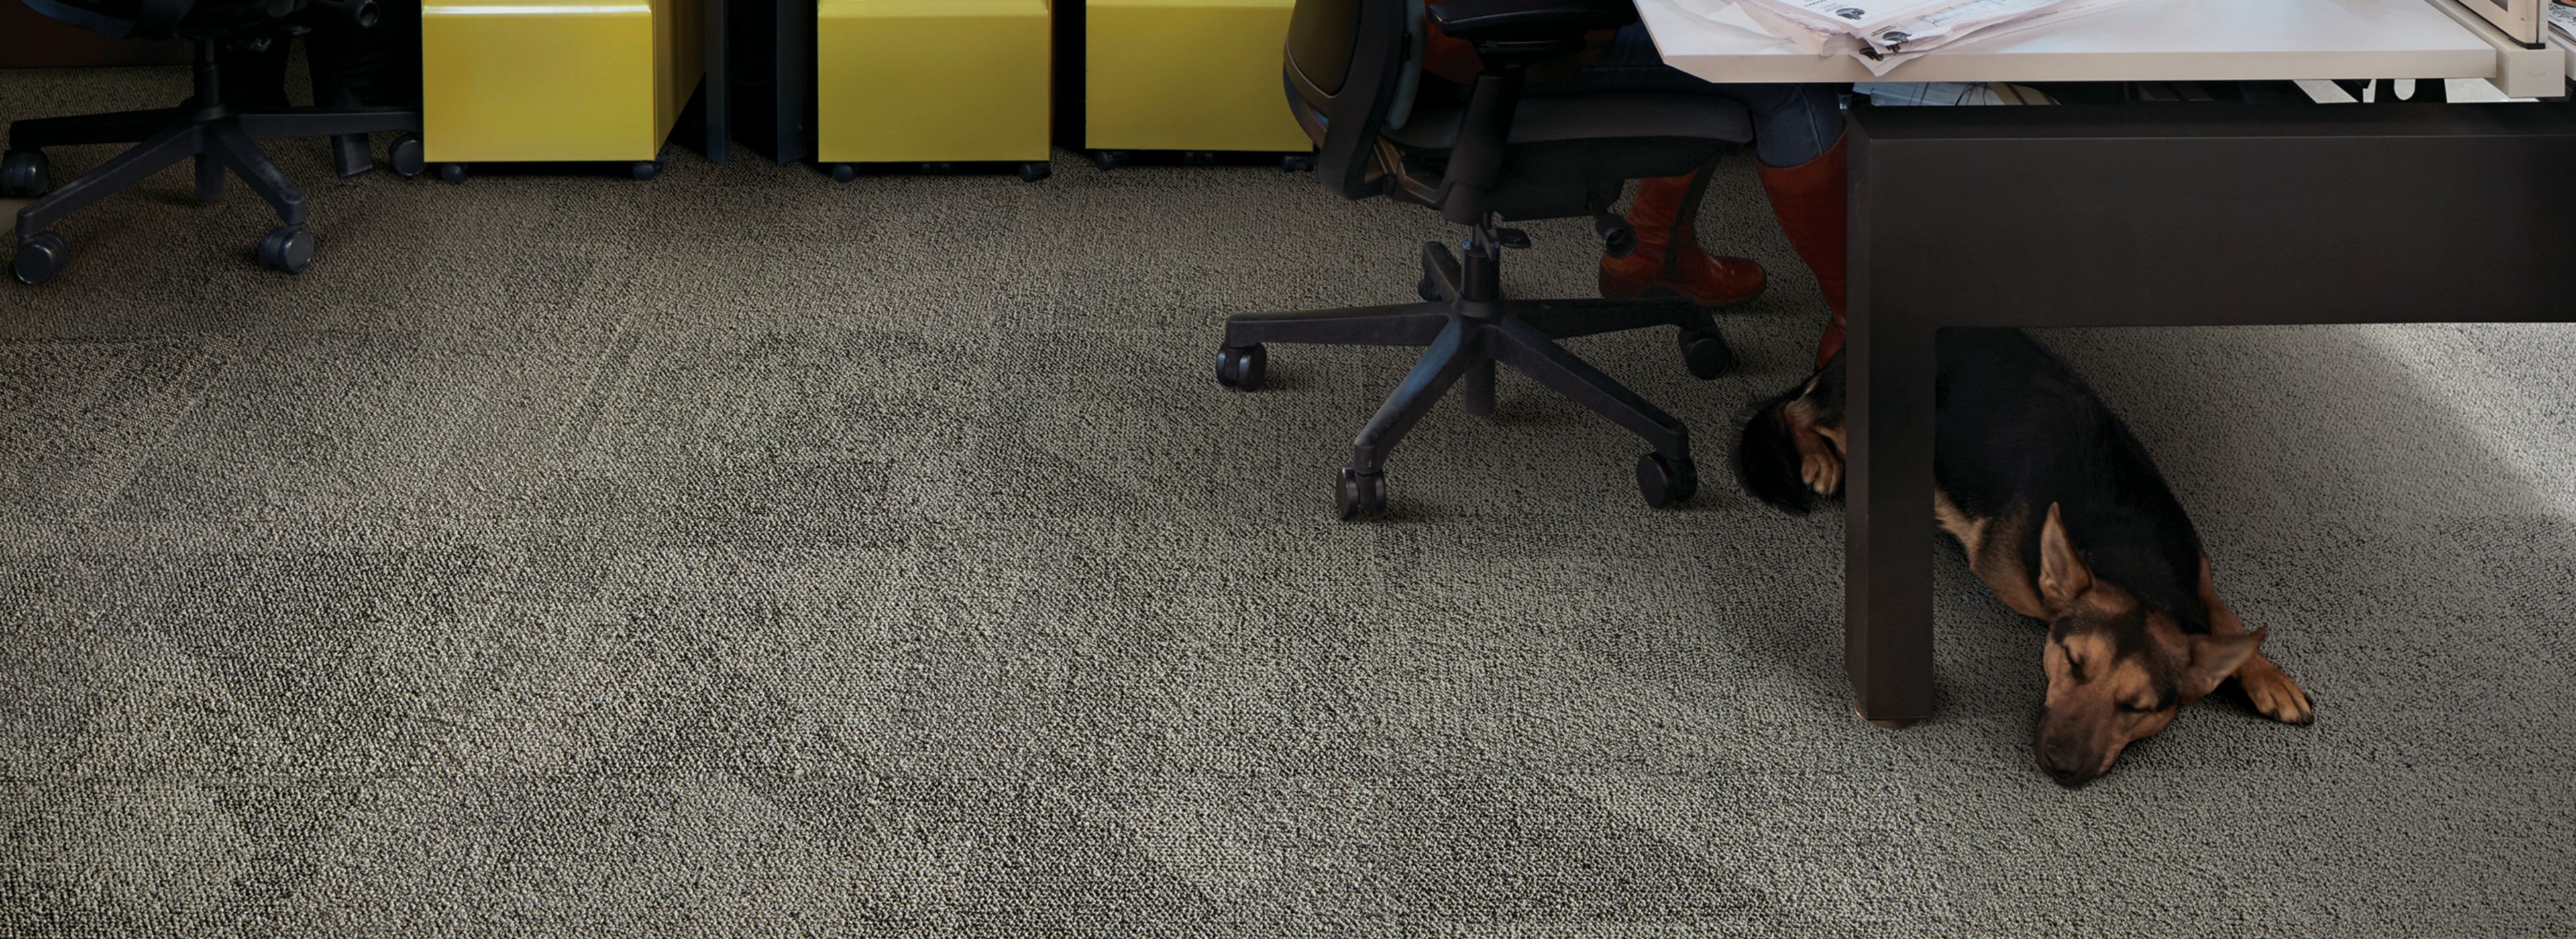 Interface Paver carpet tile and HN850 plank carpet tile in open office area with multiple people working at desk image number 1